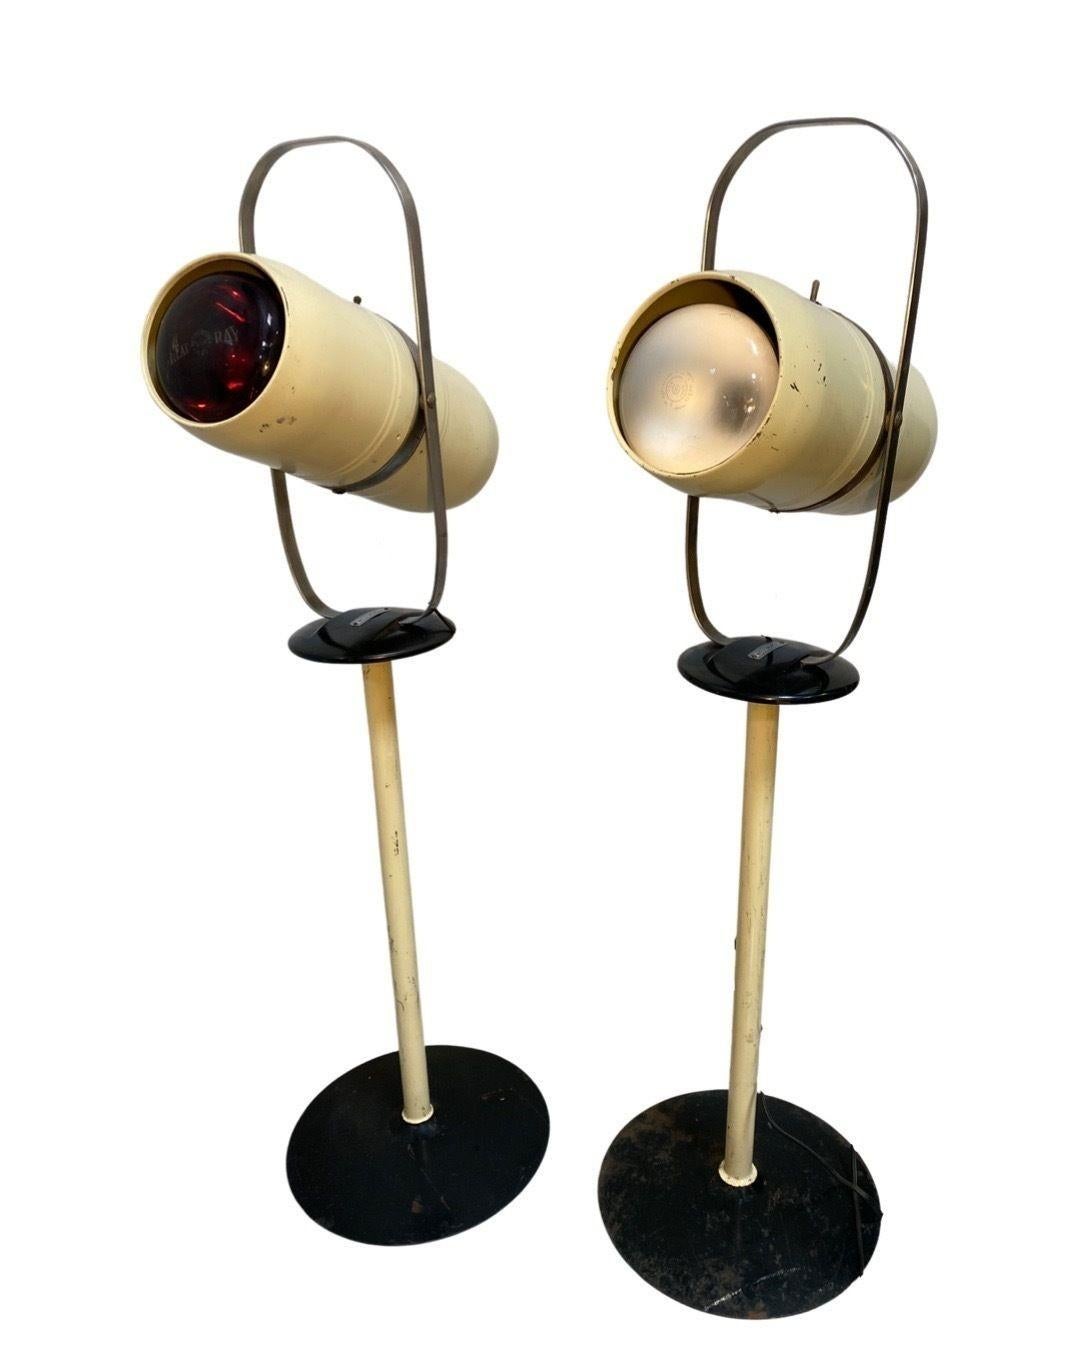 This vintage pair of Westinghouse 'Select-O-Ray' floor lamps is a true nostalgic wonder. In 100% original, vintage condition, including the original lamp bulbs, this brilliant lamp boasts tons of character and bold retro style. The dual-light